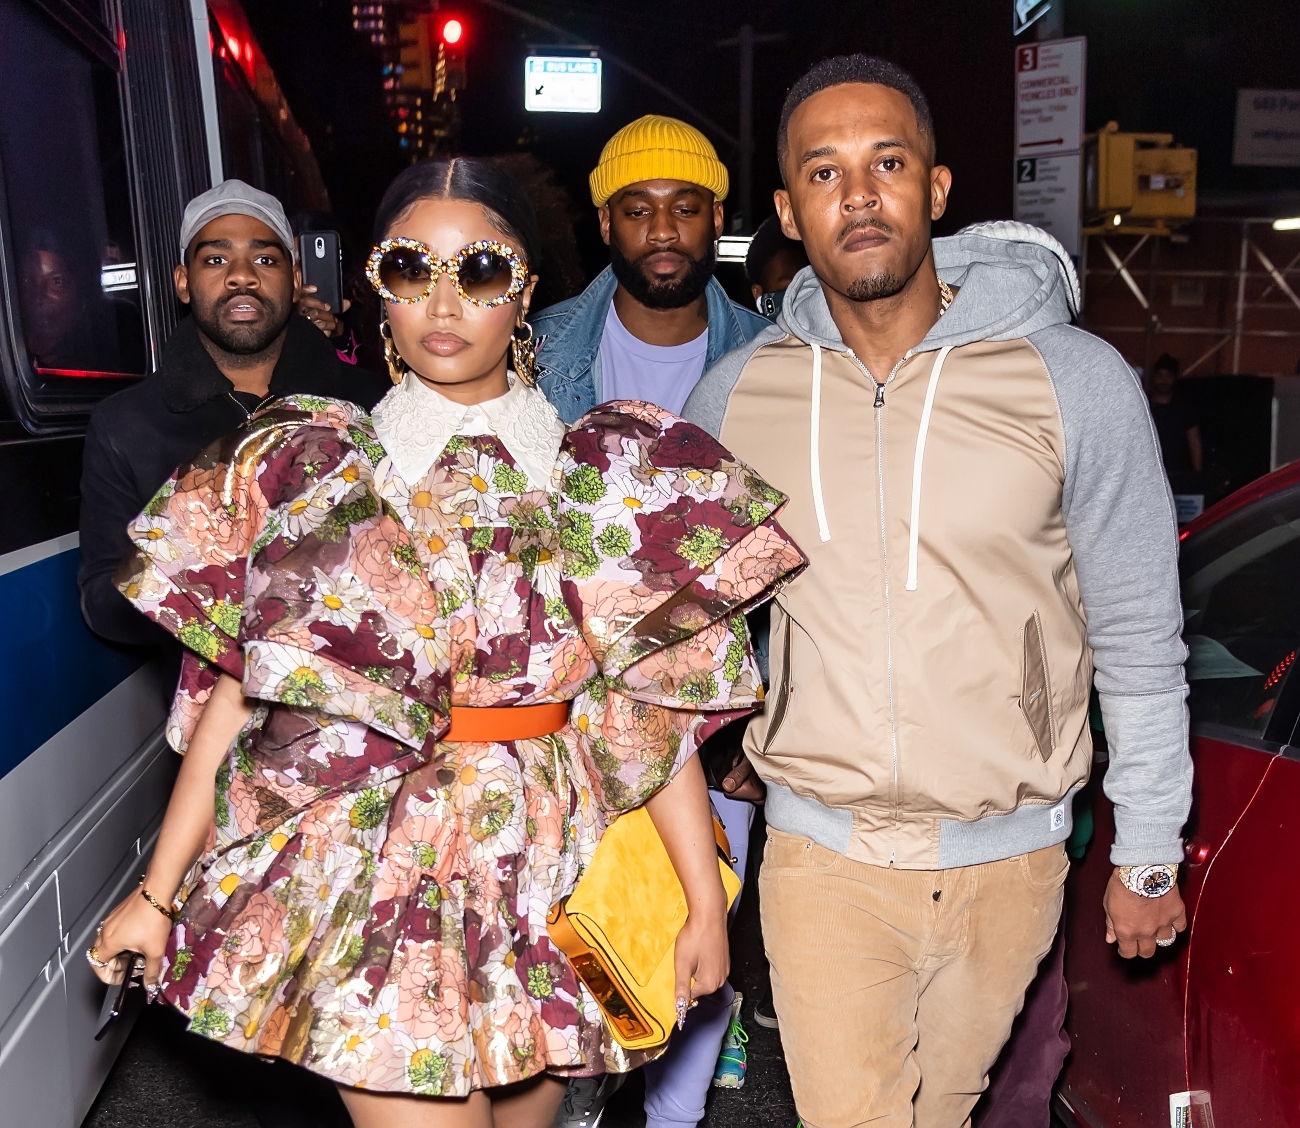 Nicki Minaj Confirms Pregnancy on Instagram, Fans Can’t Stop Gushing About Her Dream Coming True